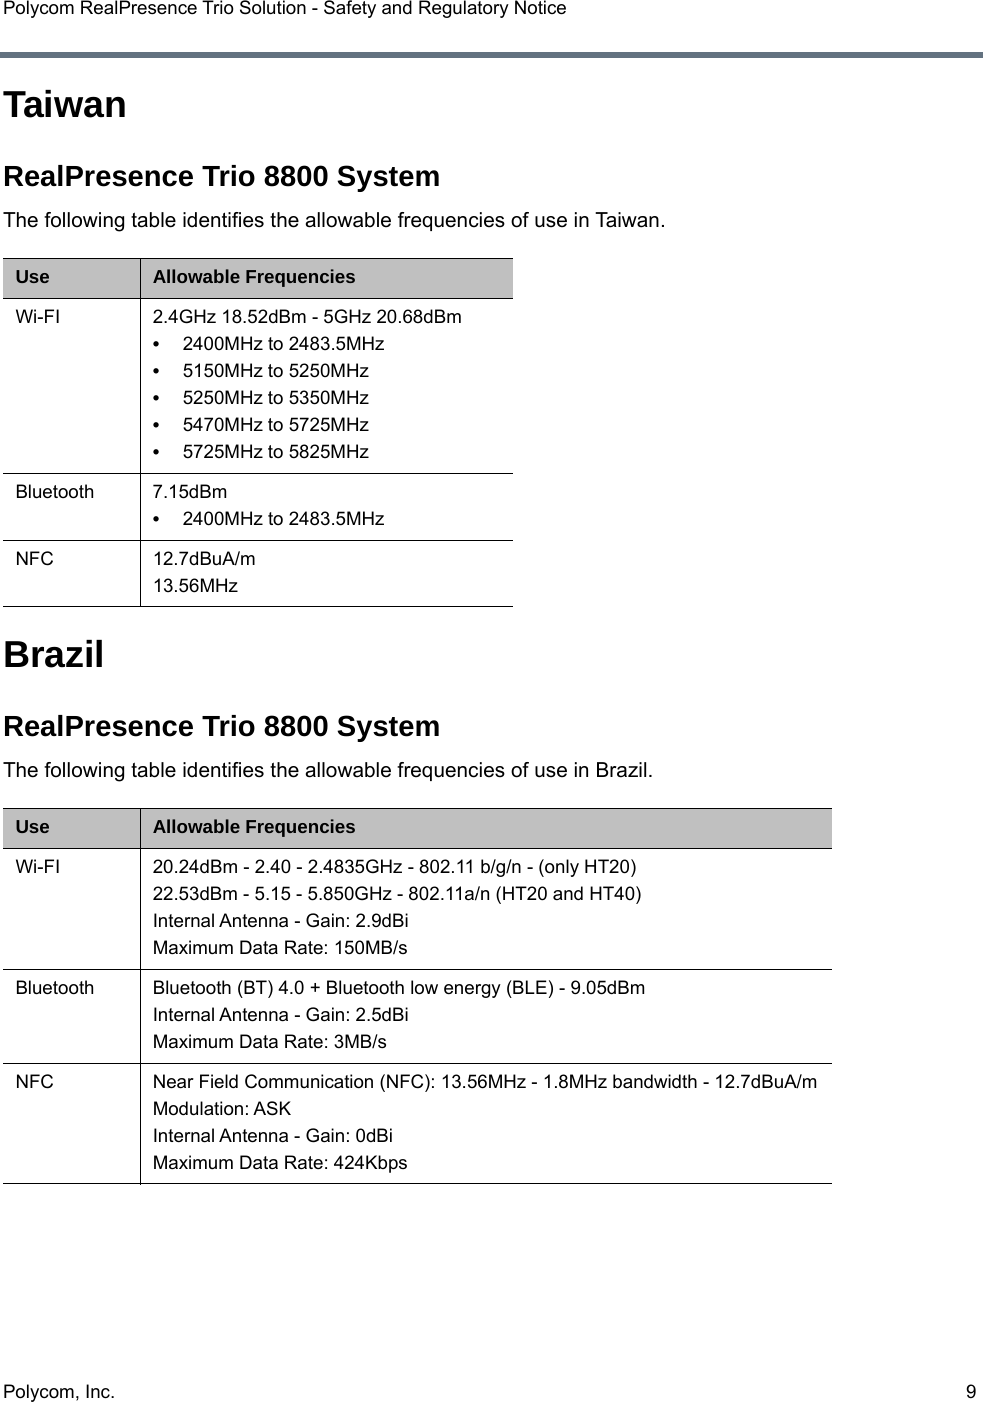 Polycom, Inc.  9Polycom RealPresence Trio Solution - Safety and Regulatory NoticeTaiwanRealPresence Trio 8800 SystemThe following table identifies the allowable frequencies of use in Taiwan.BrazilRealPresence Trio 8800 SystemThe following table identifies the allowable frequencies of use in Brazil.Use Allowable FrequenciesWi-FI 2.4GHz 18.52dBm - 5GHz 20.68dBm•2400MHz to 2483.5MHz•5150MHz to 5250MHz•5250MHz to 5350MHz•5470MHz to 5725MHz•5725MHz to 5825MHzBluetooth 7.15dBm•2400MHz to 2483.5MHzNFC 12.7dBuA/m13.56MHzUse Allowable FrequenciesWi-FI 20.24dBm - 2.40 - 2.4835GHz - 802.11 b/g/n - (only HT20)22.53dBm - 5.15 - 5.850GHz - 802.11a/n (HT20 and HT40)Internal Antenna - Gain: 2.9dBiMaximum Data Rate: 150MB/sBluetooth Bluetooth (BT) 4.0 + Bluetooth low energy (BLE) - 9.05dBmInternal Antenna - Gain: 2.5dBiMaximum Data Rate: 3MB/s NFC Near Field Communication (NFC): 13.56MHz - 1.8MHz bandwidth - 12.7dBuA/mModulation: ASKInternal Antenna - Gain: 0dBiMaximum Data Rate: 424Kbps